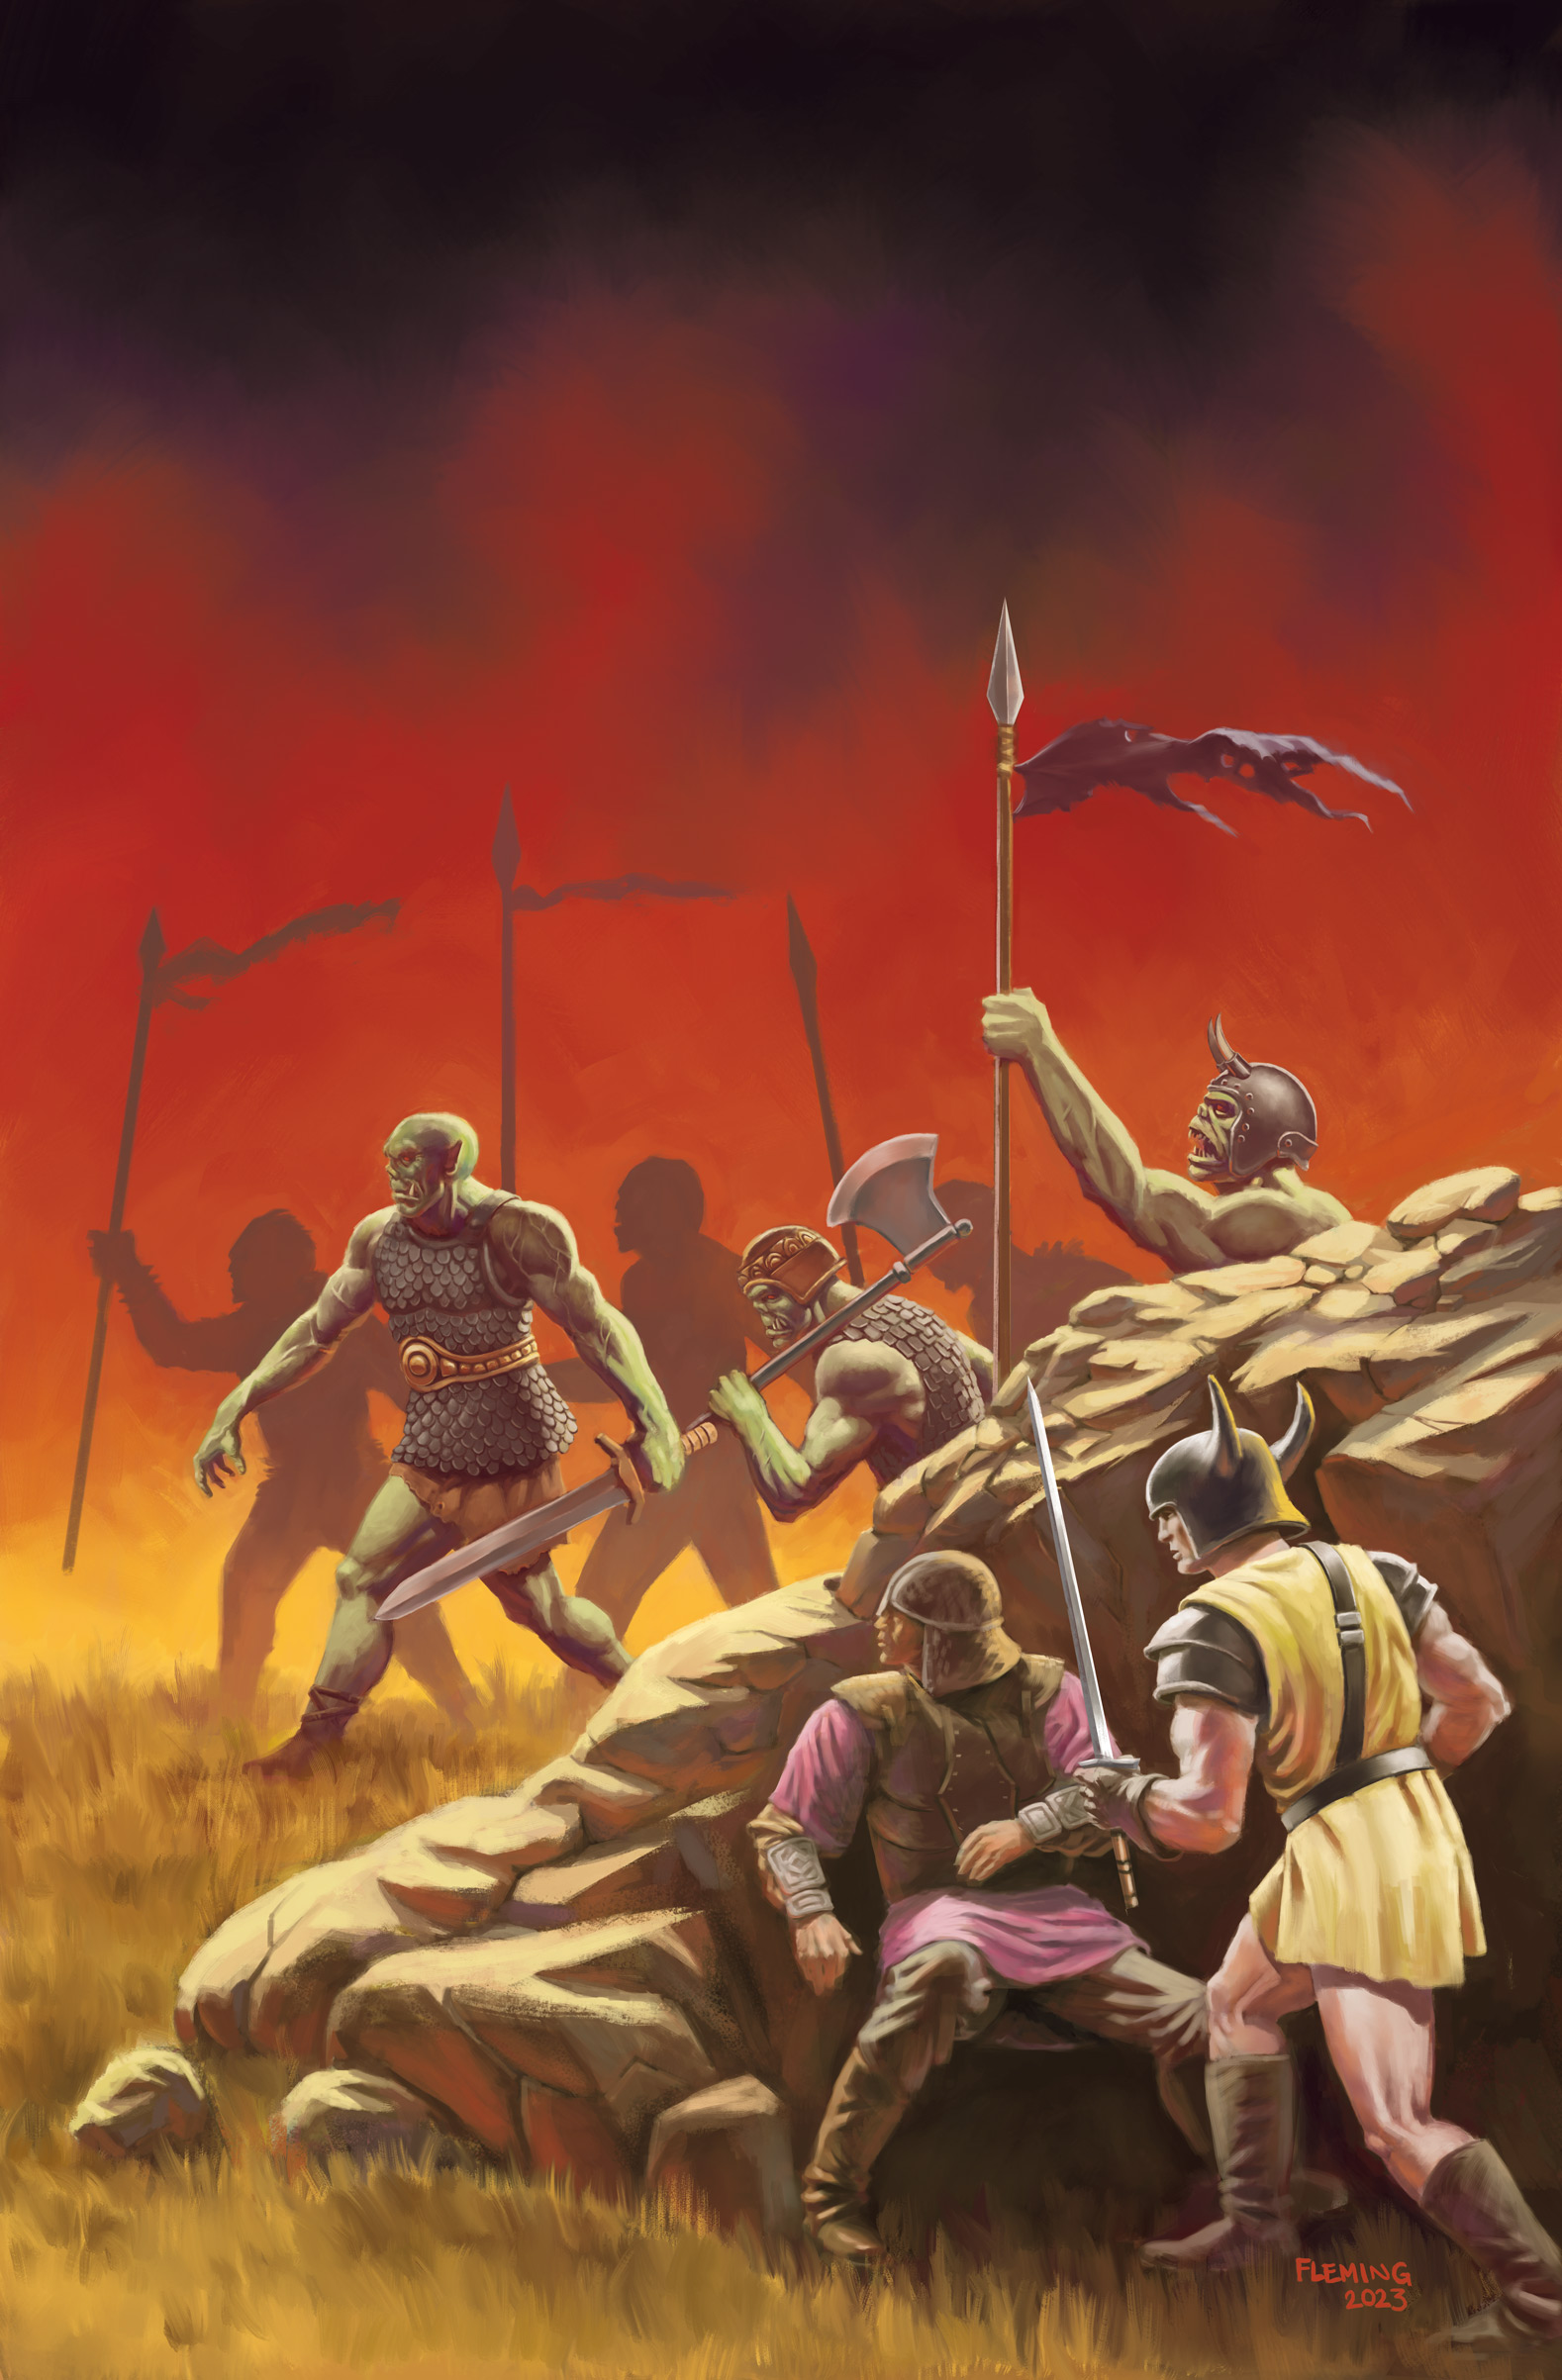 “Overland Encounter” – The Scourge of Northland Cover update